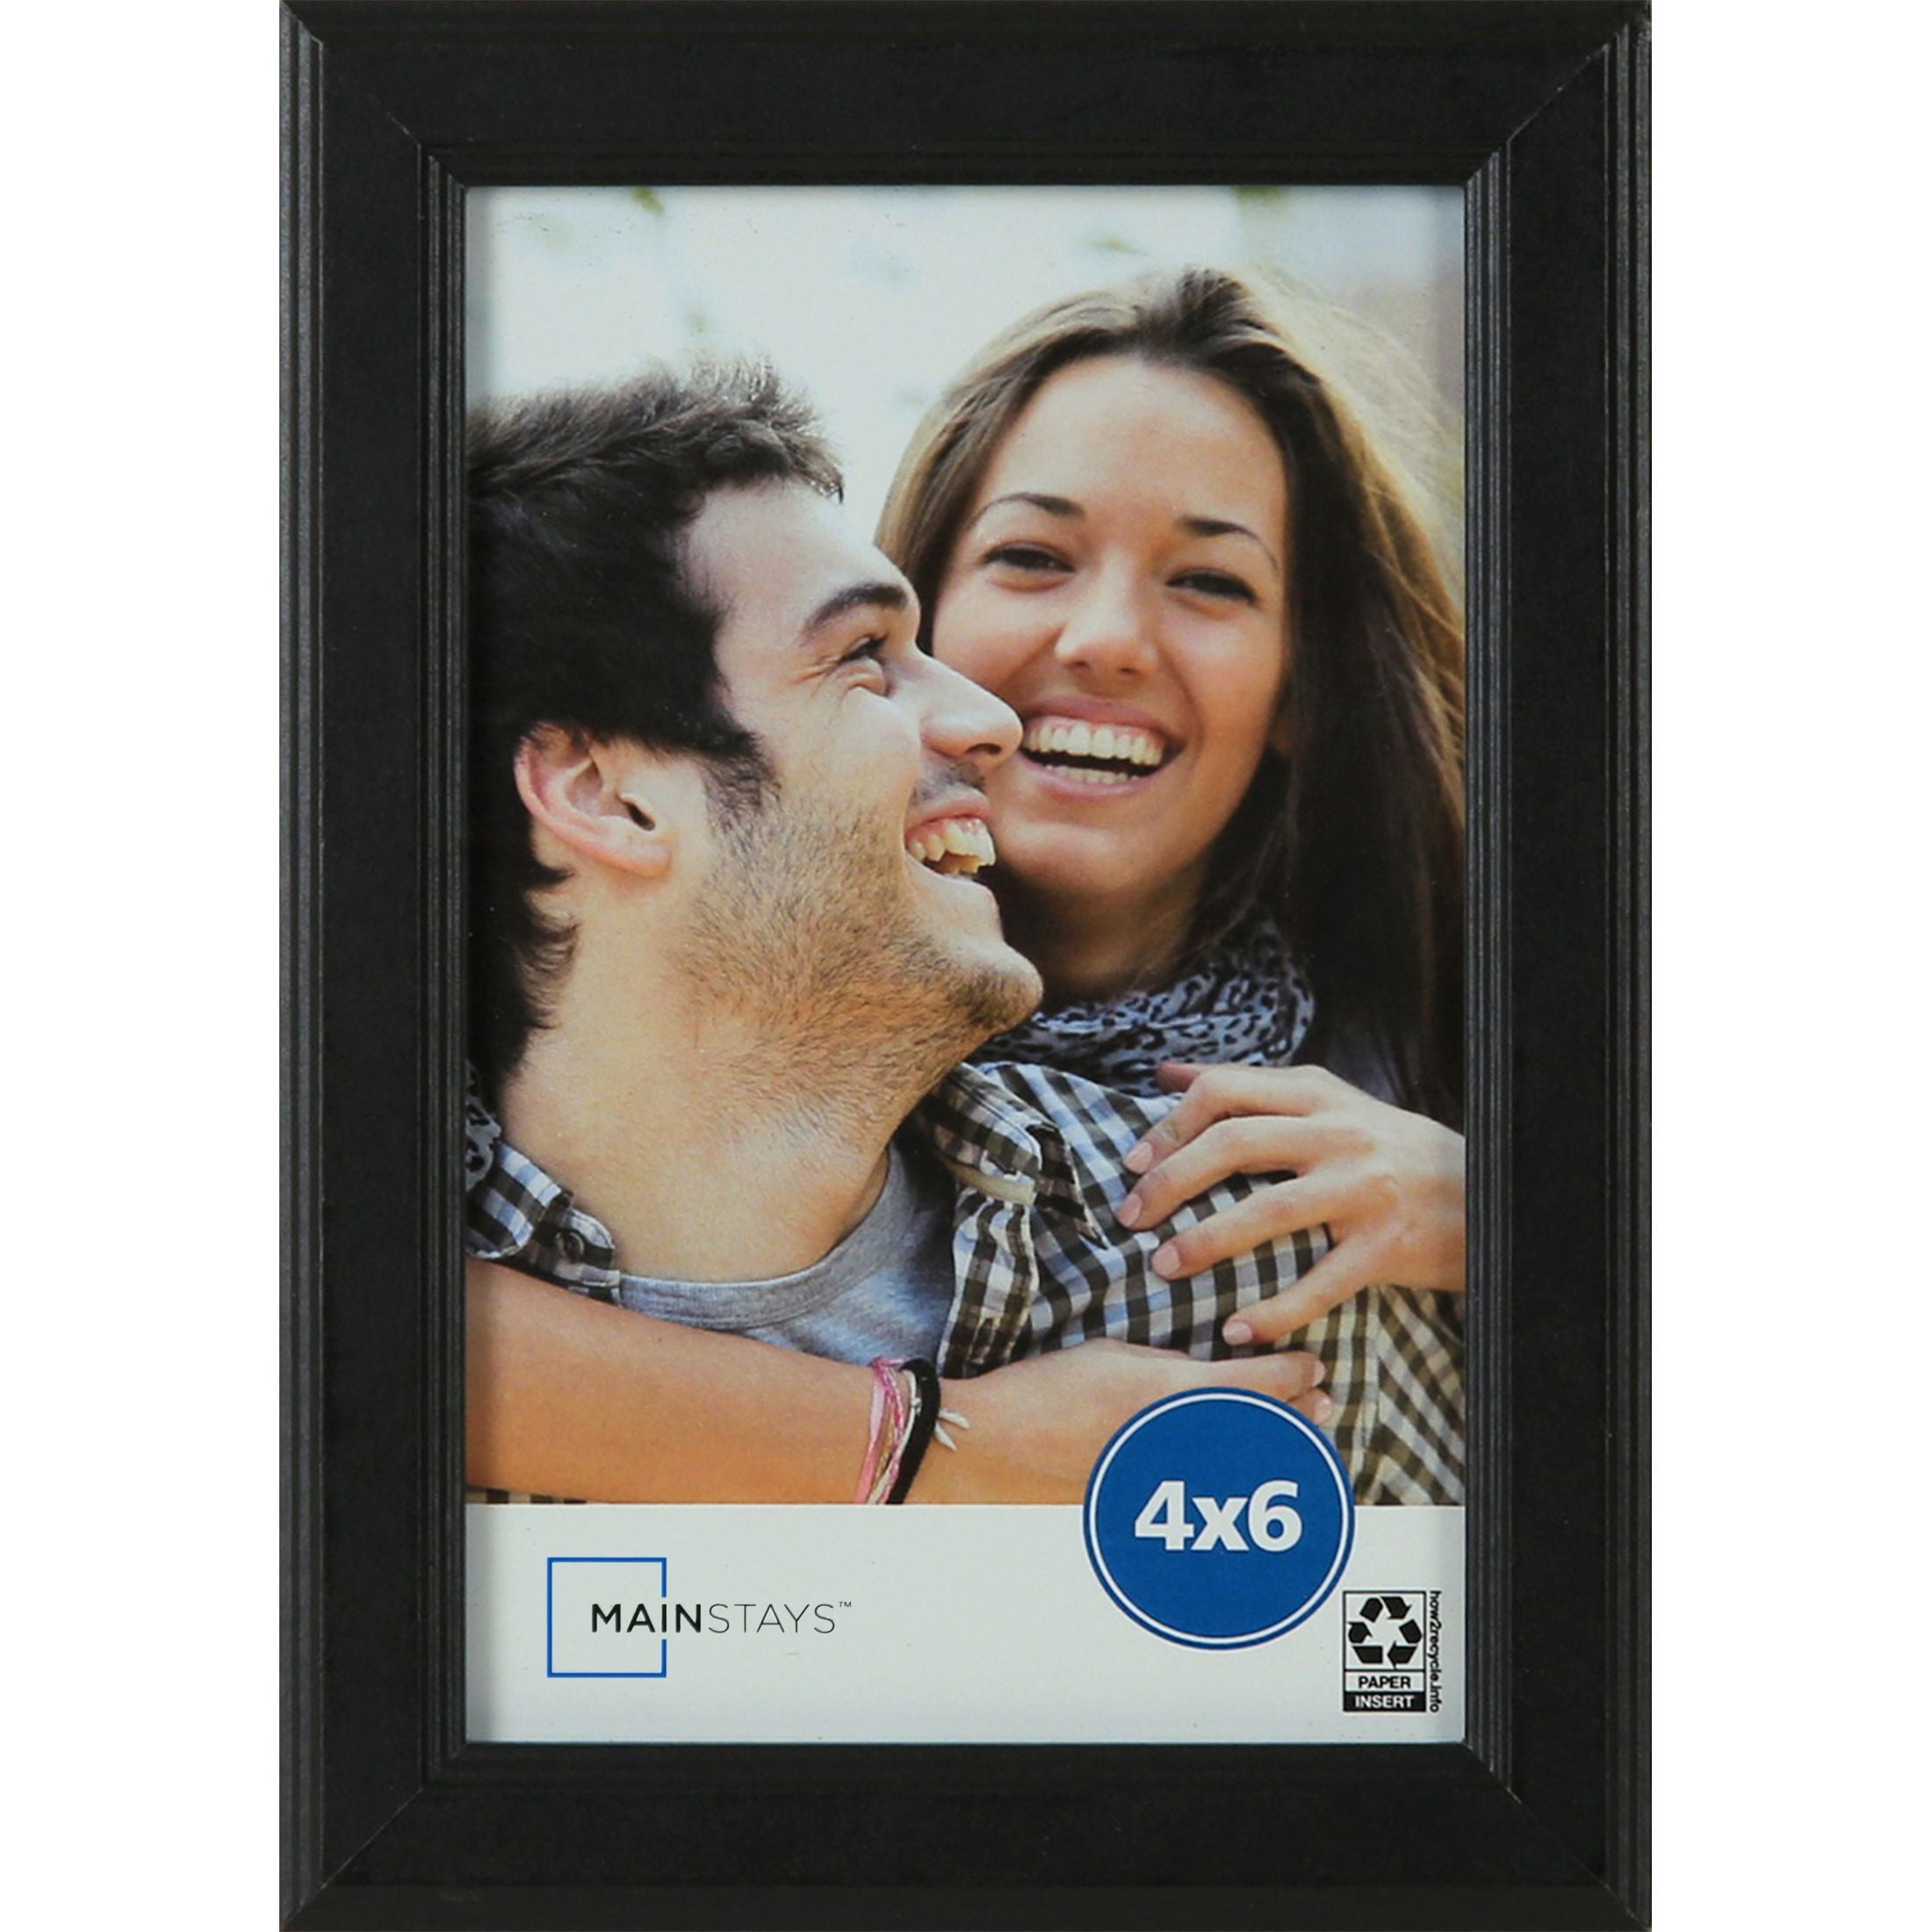 Mainstays 4x6 Step Black Gallery Wall Picture Frame